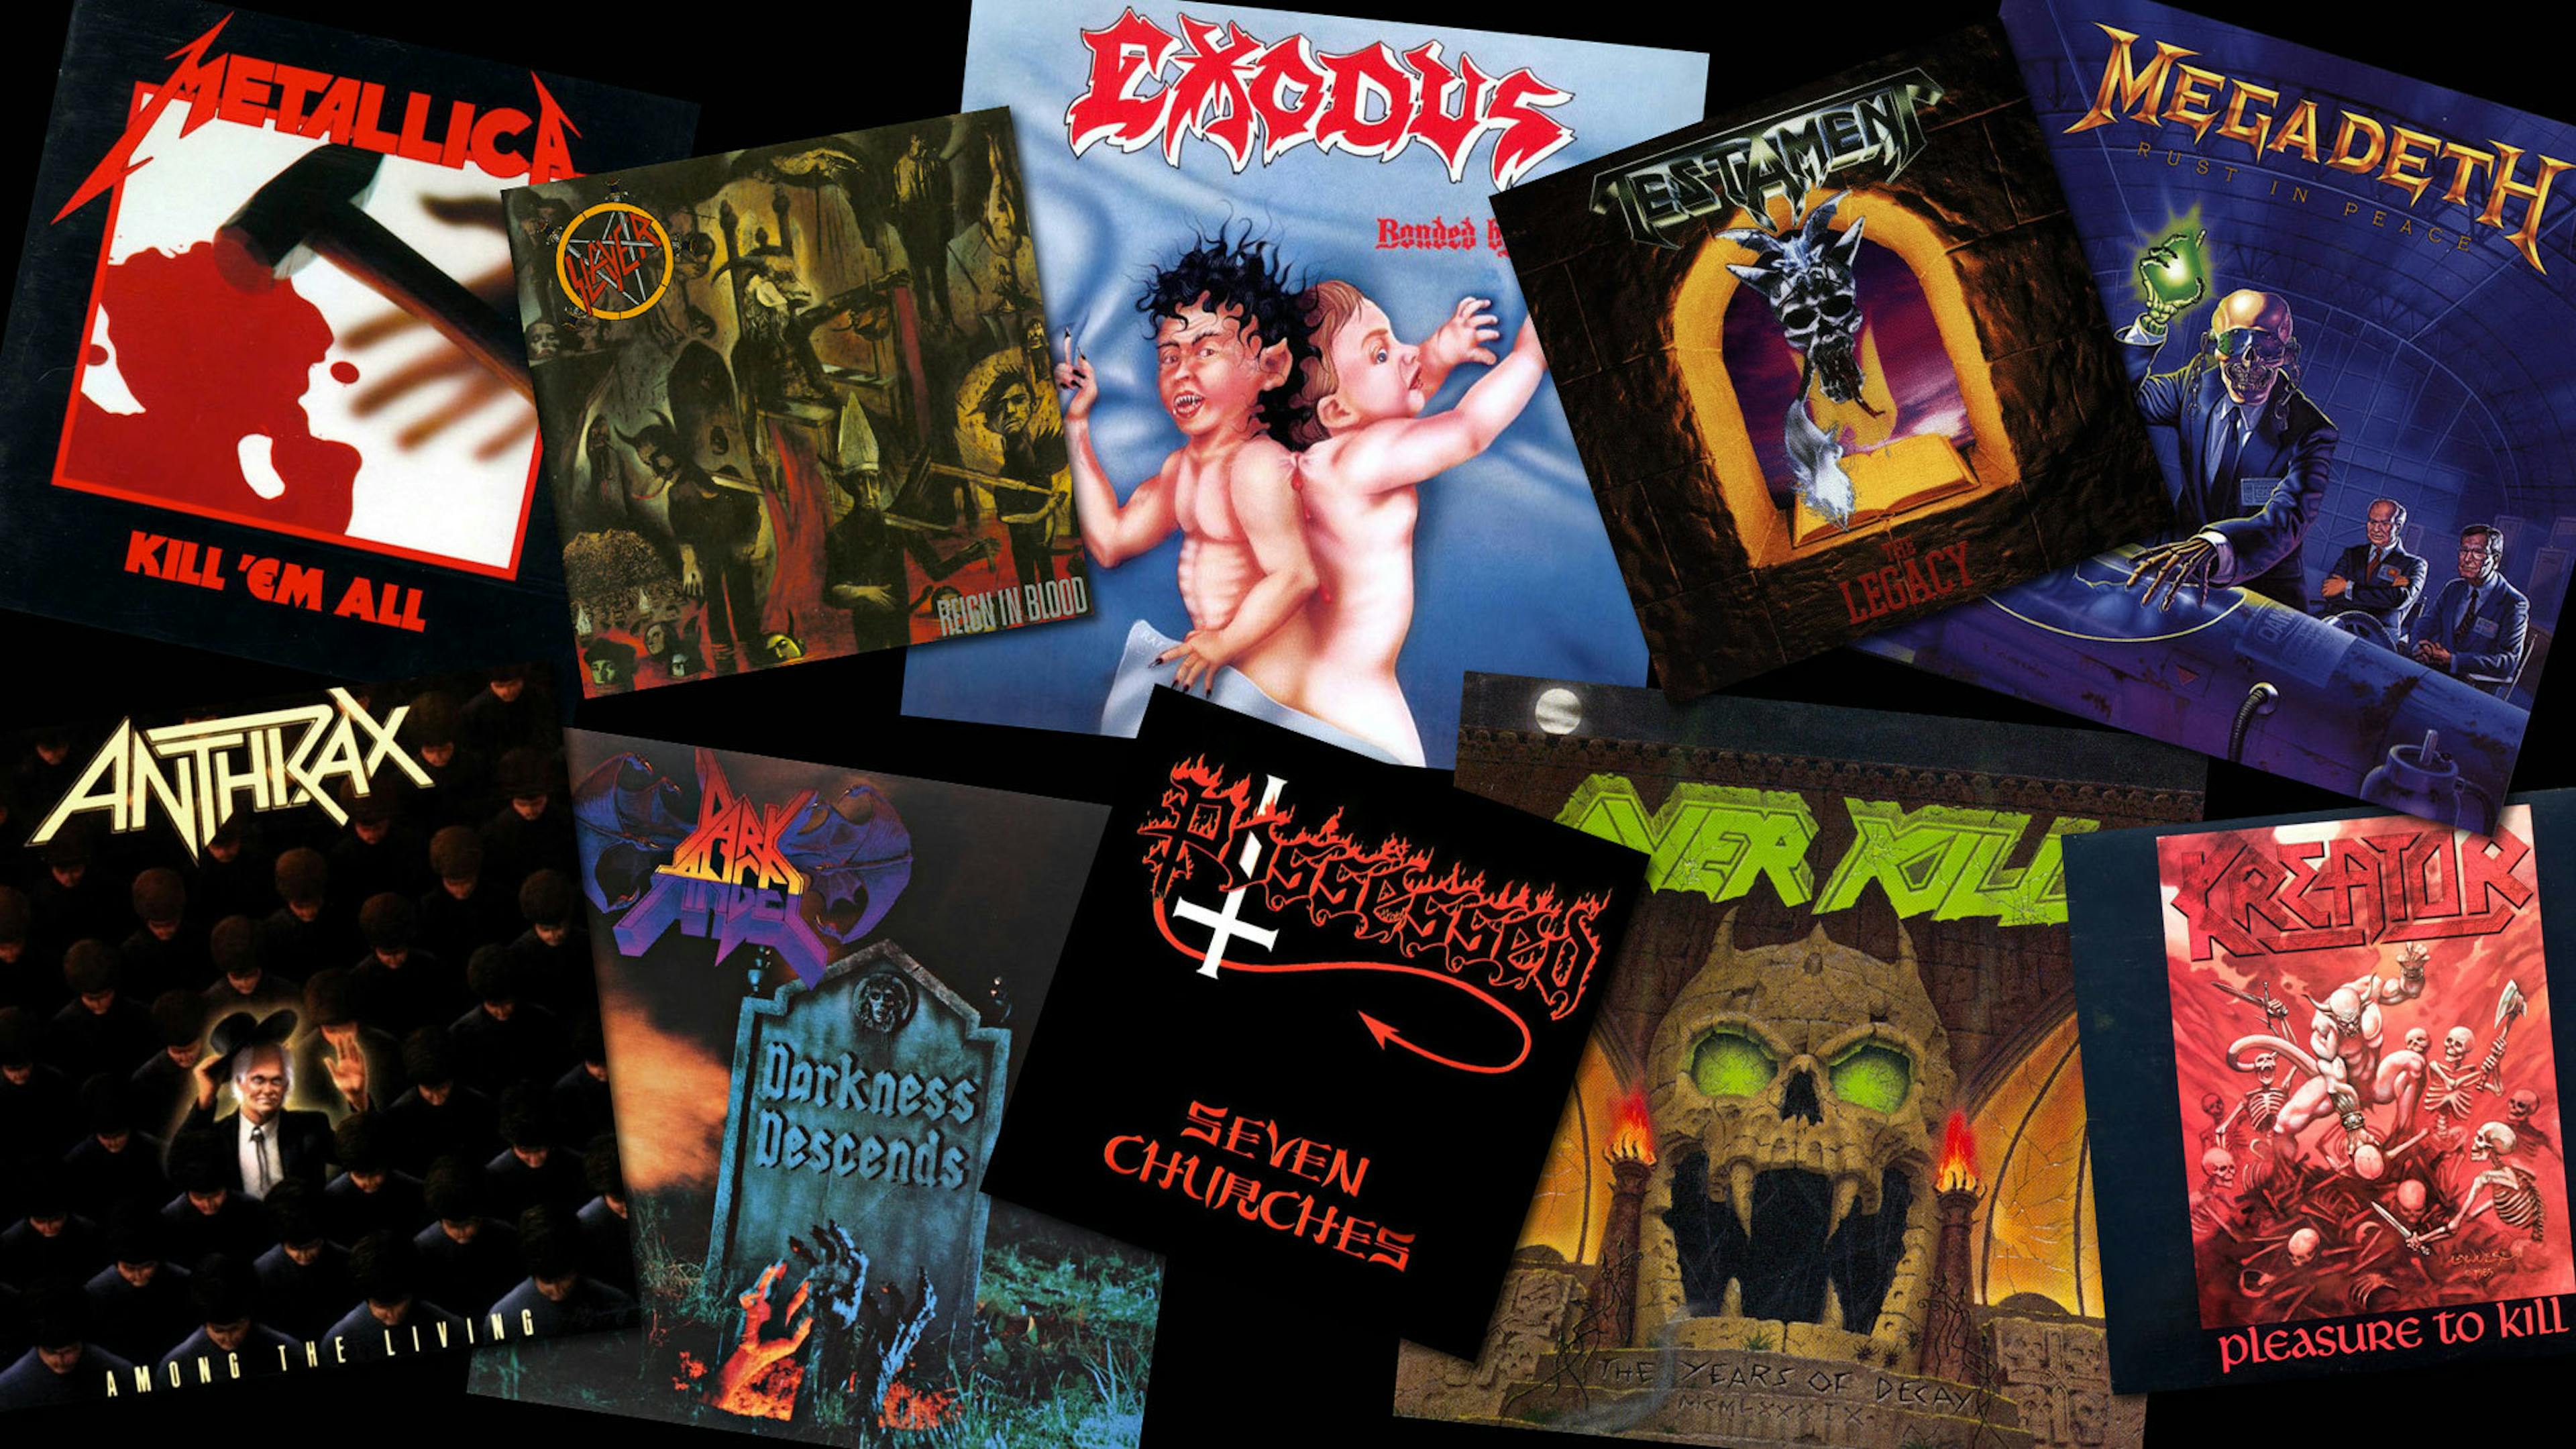 Vote For The Greatest Thrash Album Of All Time